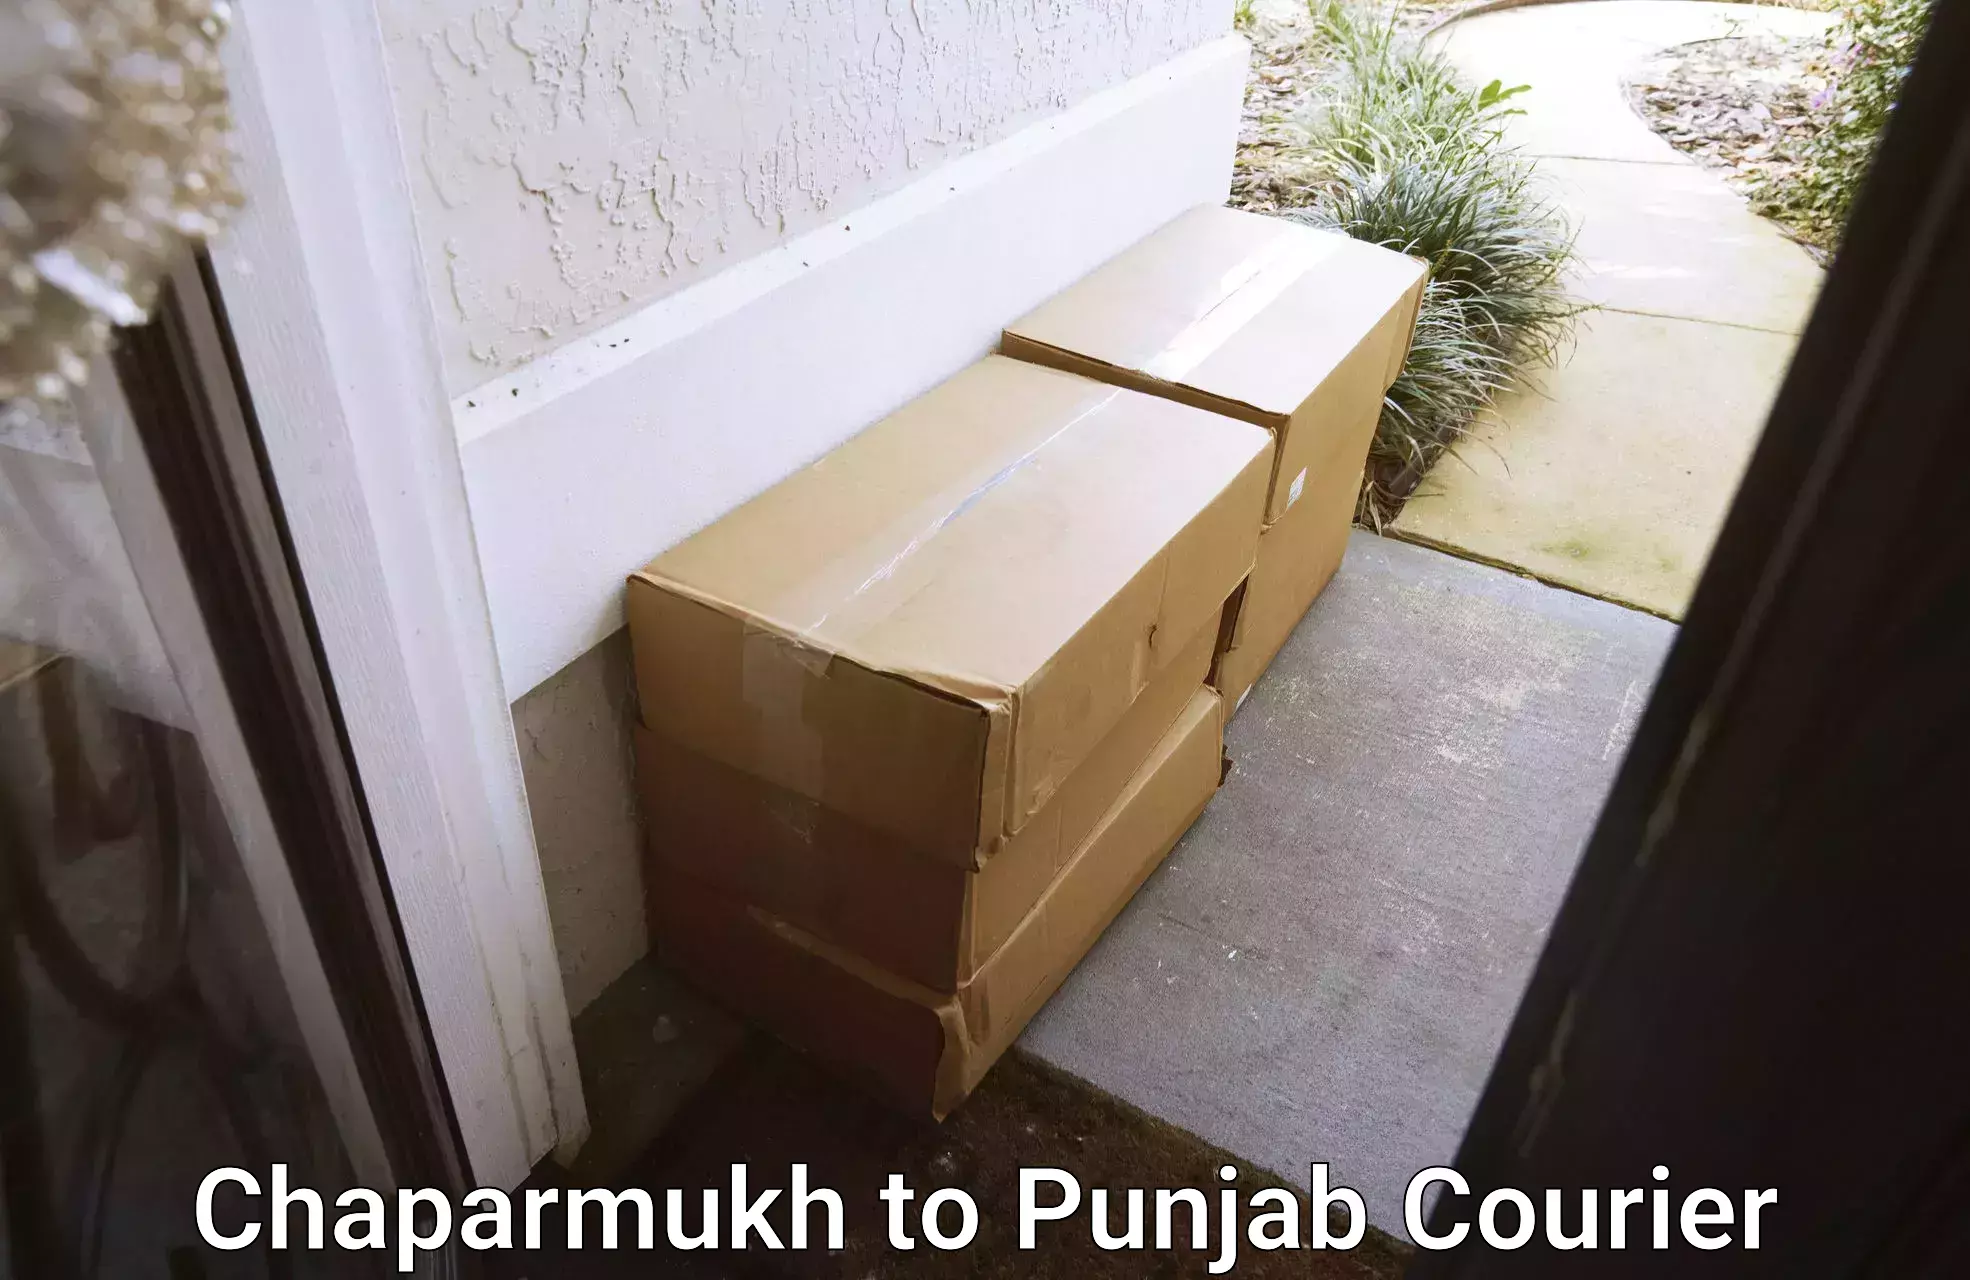 Courier services in Chaparmukh to Abohar